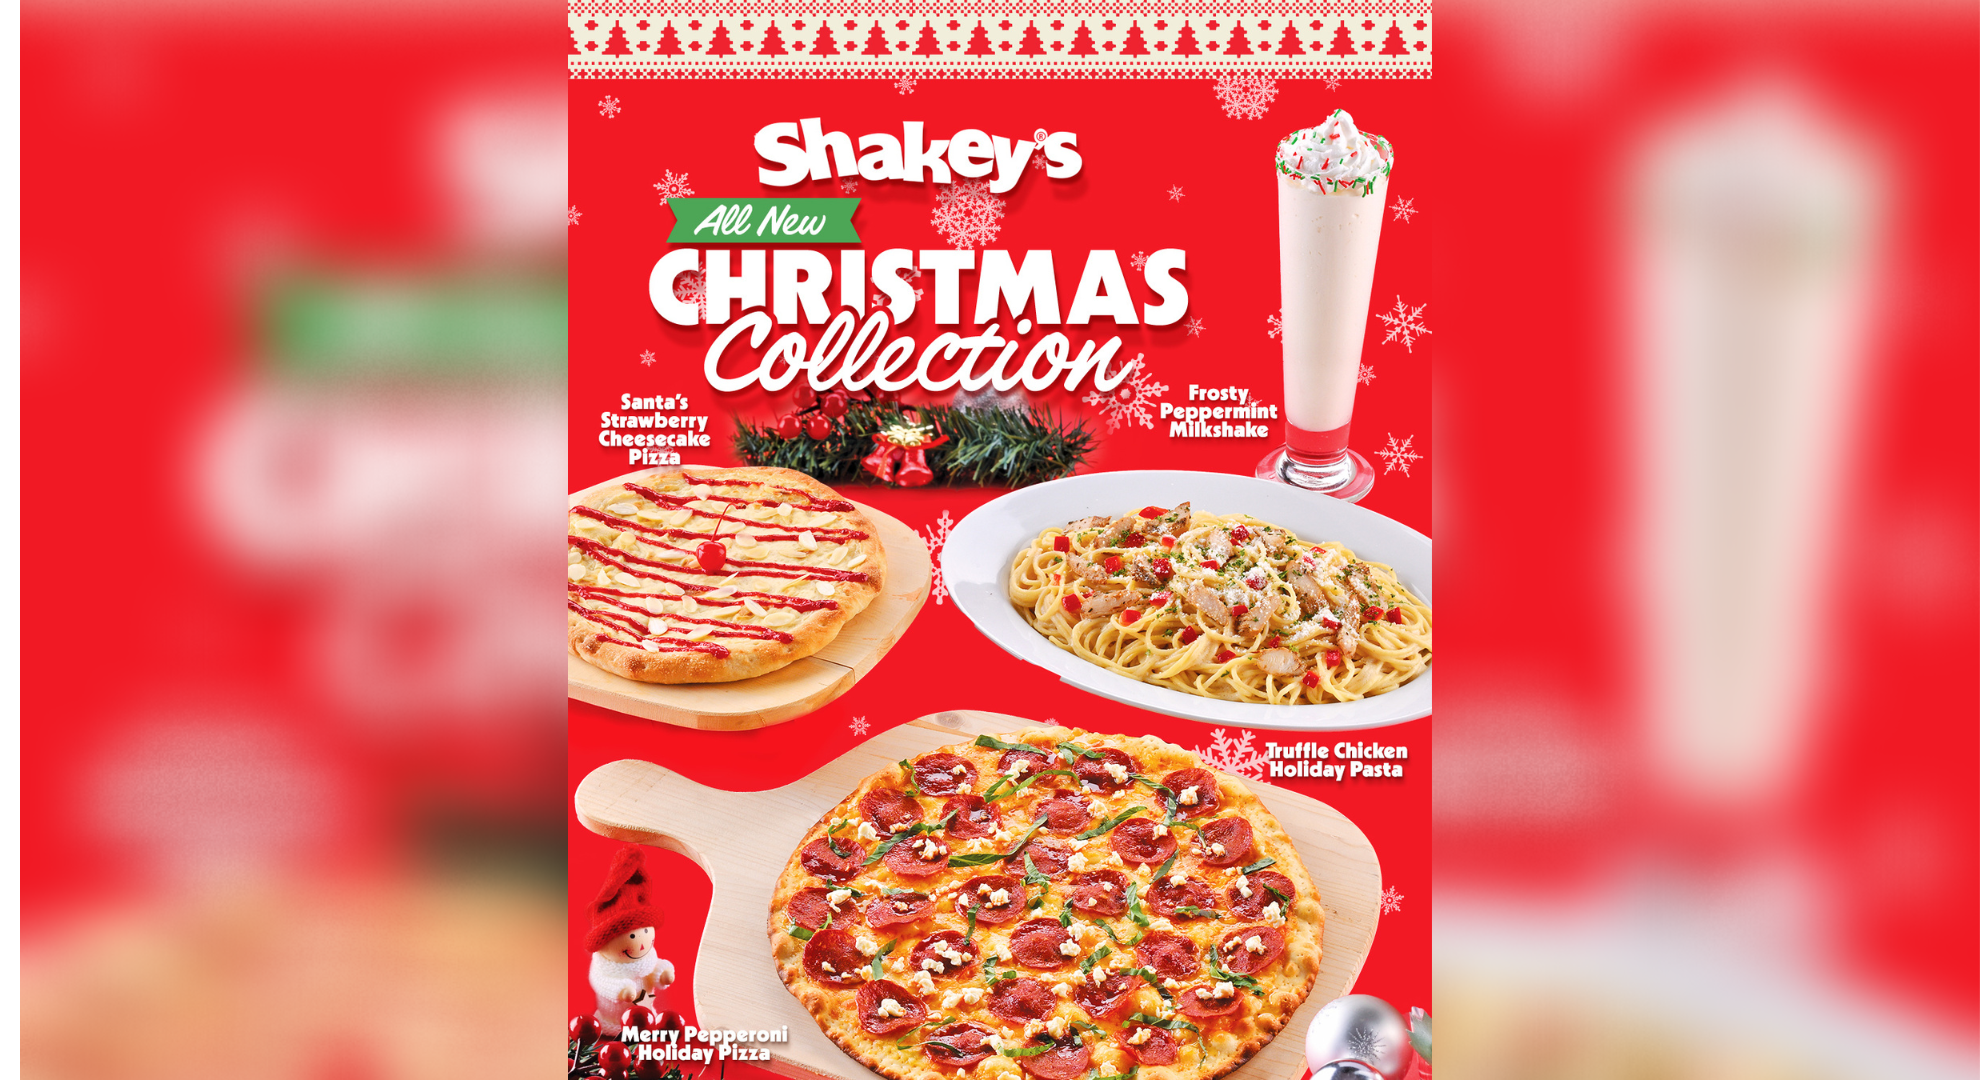 It’s beginning to taste a lot like Christmas with  Shakey’s all-new Christmas Collection